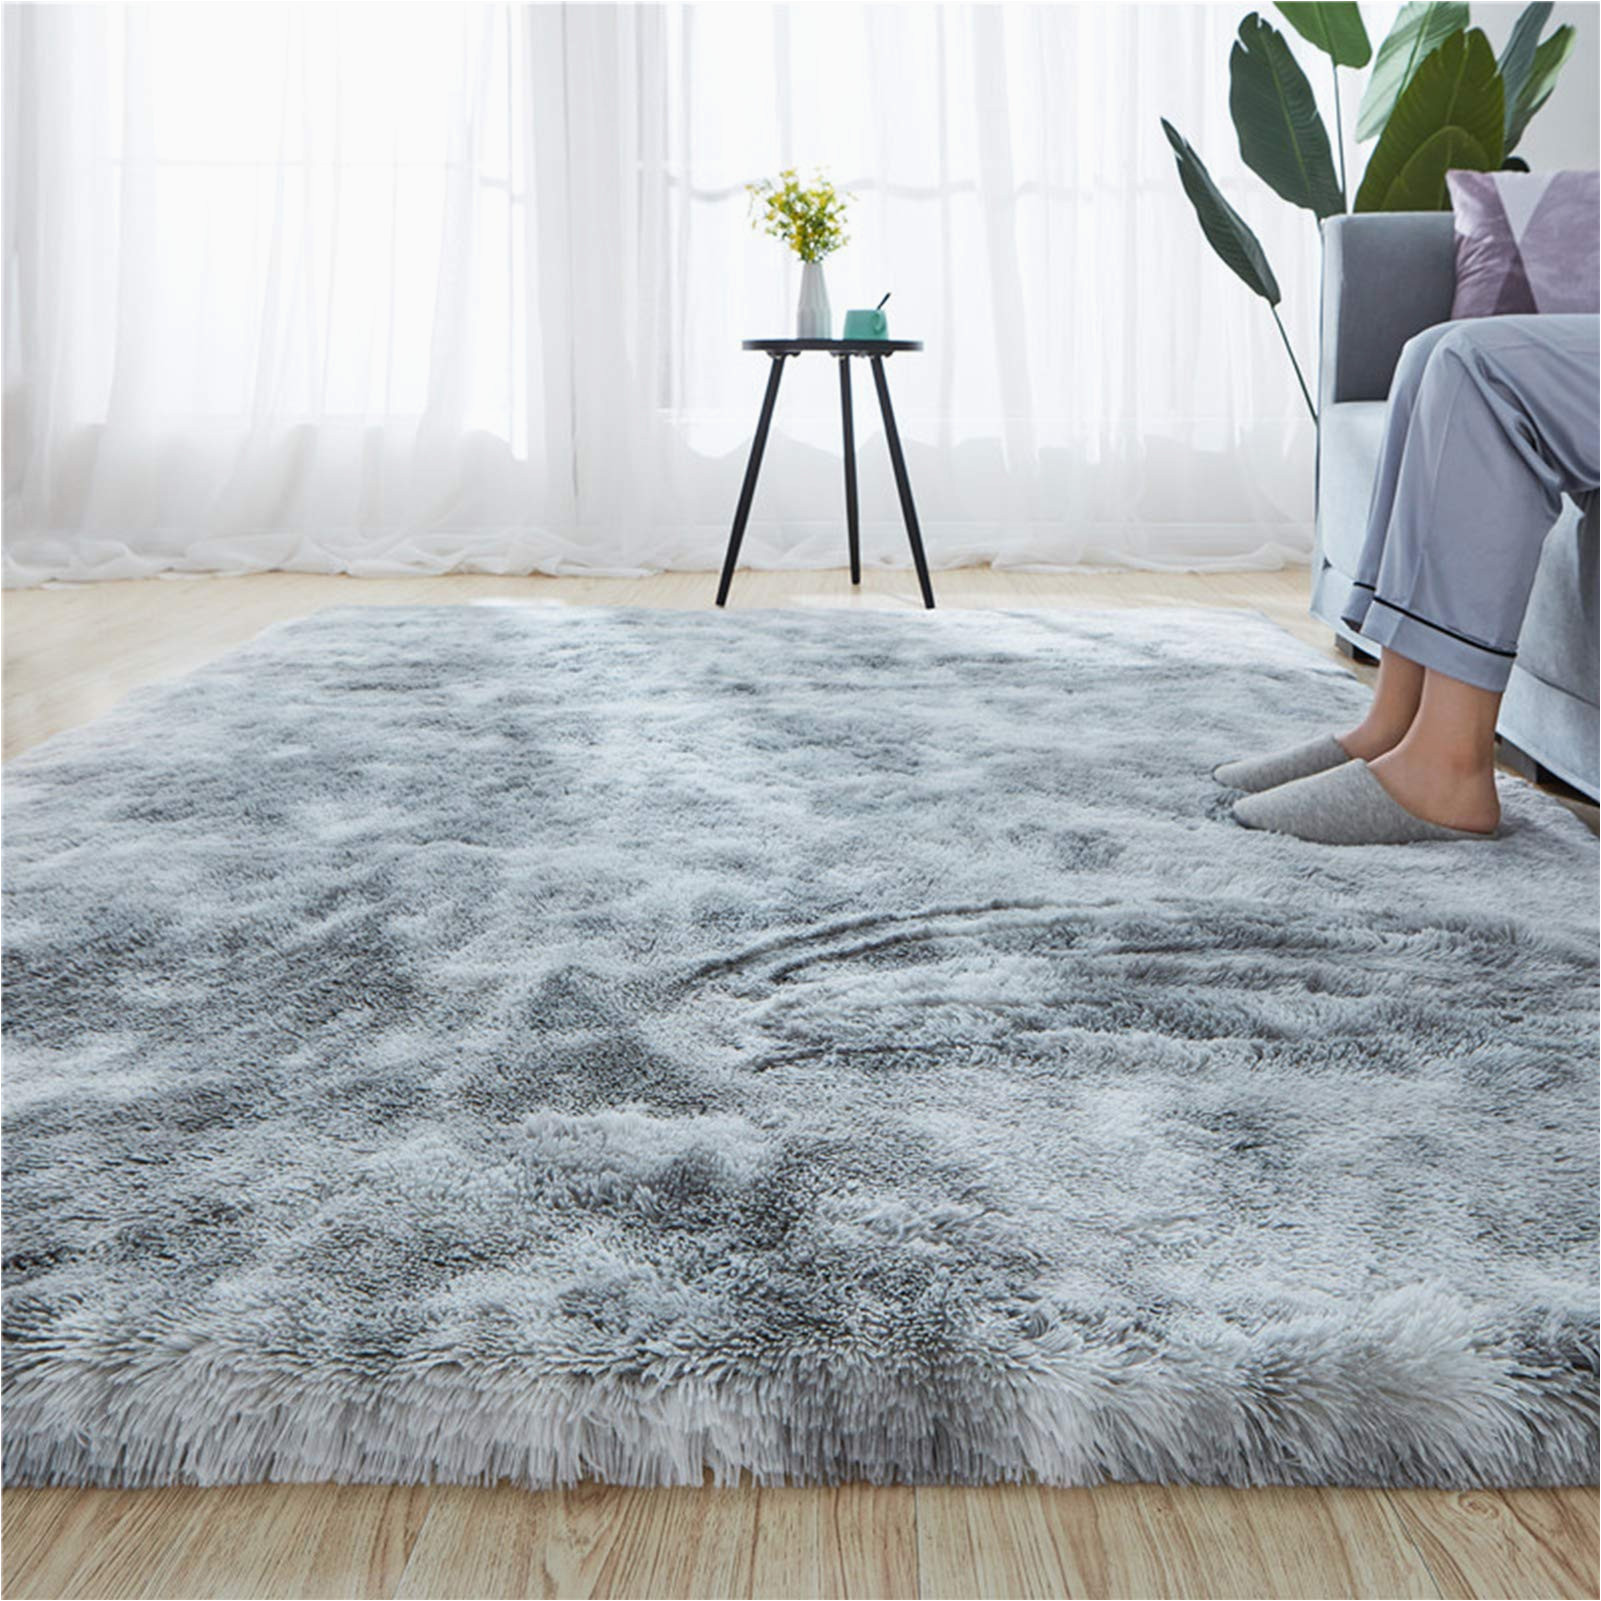 Dining Room area Rugs 6×9 Rainlin Shaggy 6×9 area Rug Modern Indoor Plush Fluffy Rugs, Extra soft Comfy Carpets, Cute Cozy area Rugs for Bedroom Living Room Girls Boys Kids, …